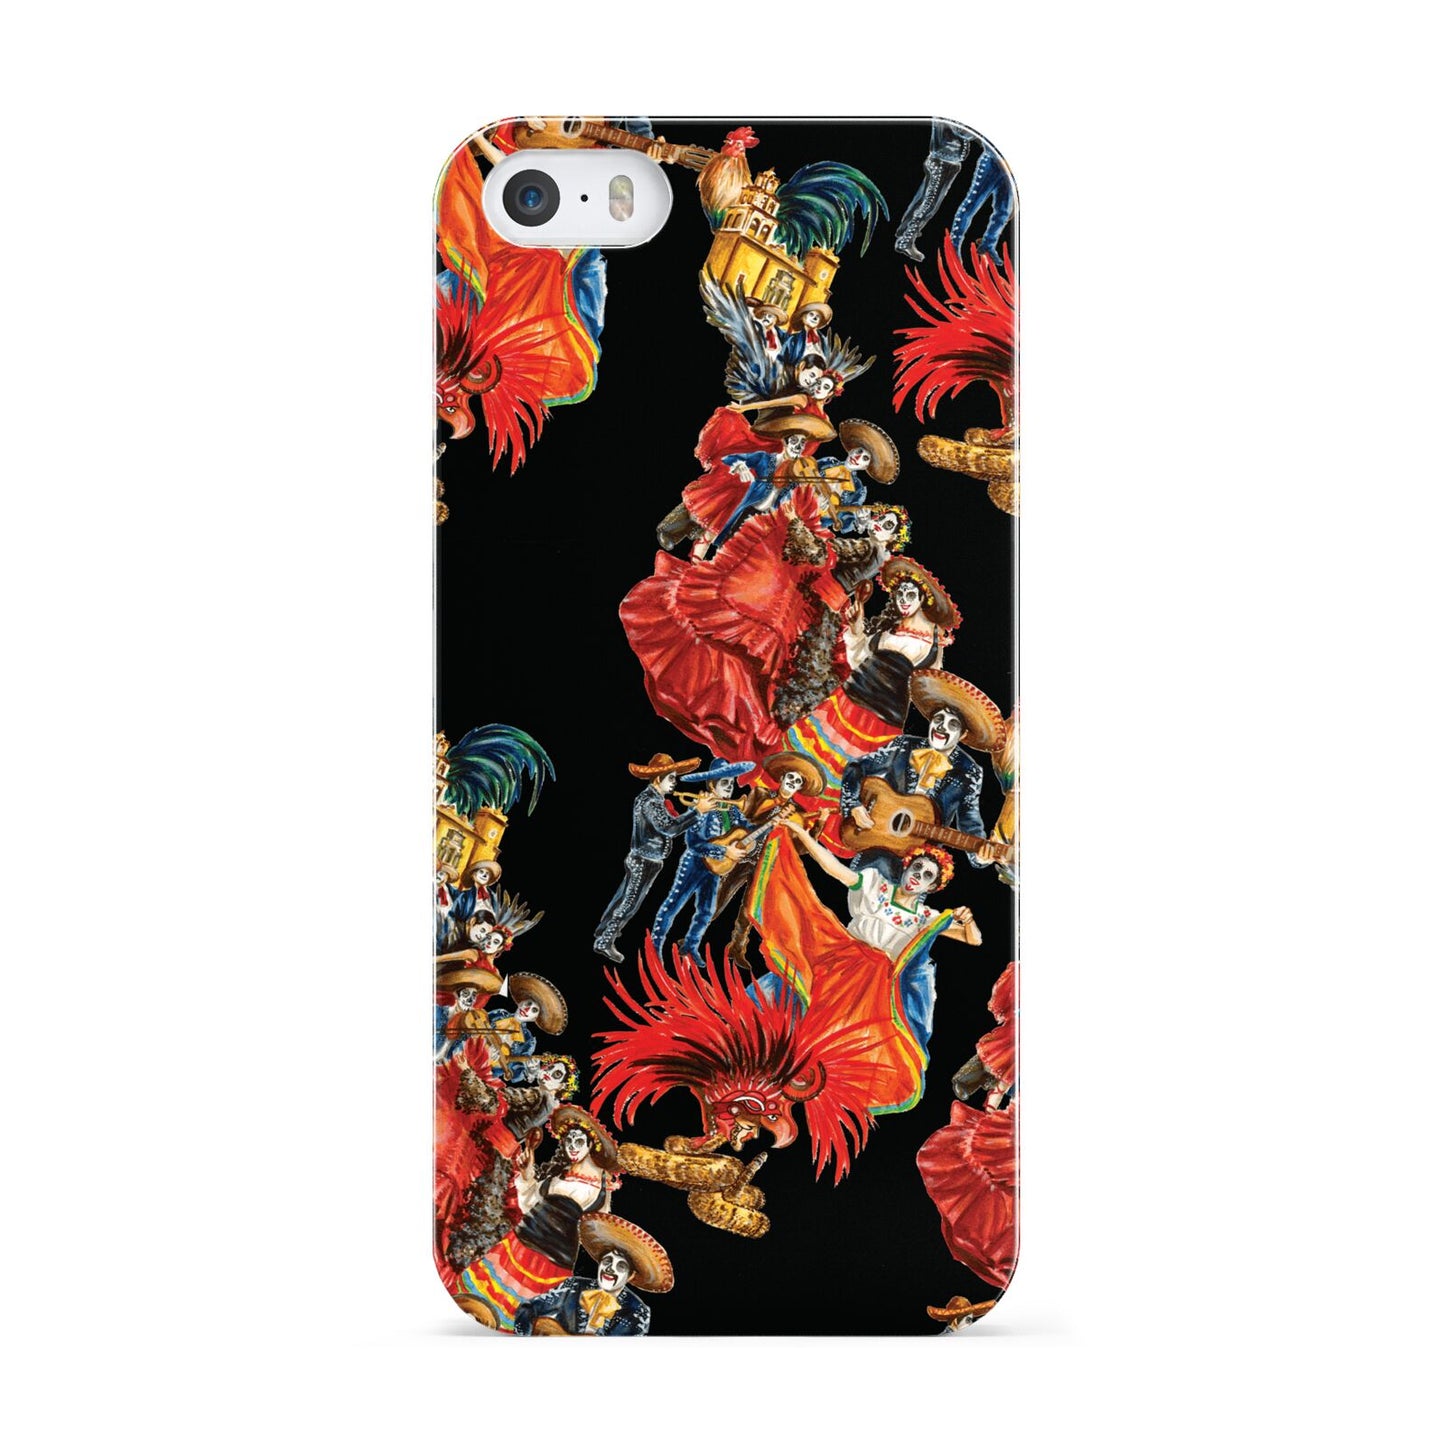 Day of the Dead Festival Apple iPhone 5 Case